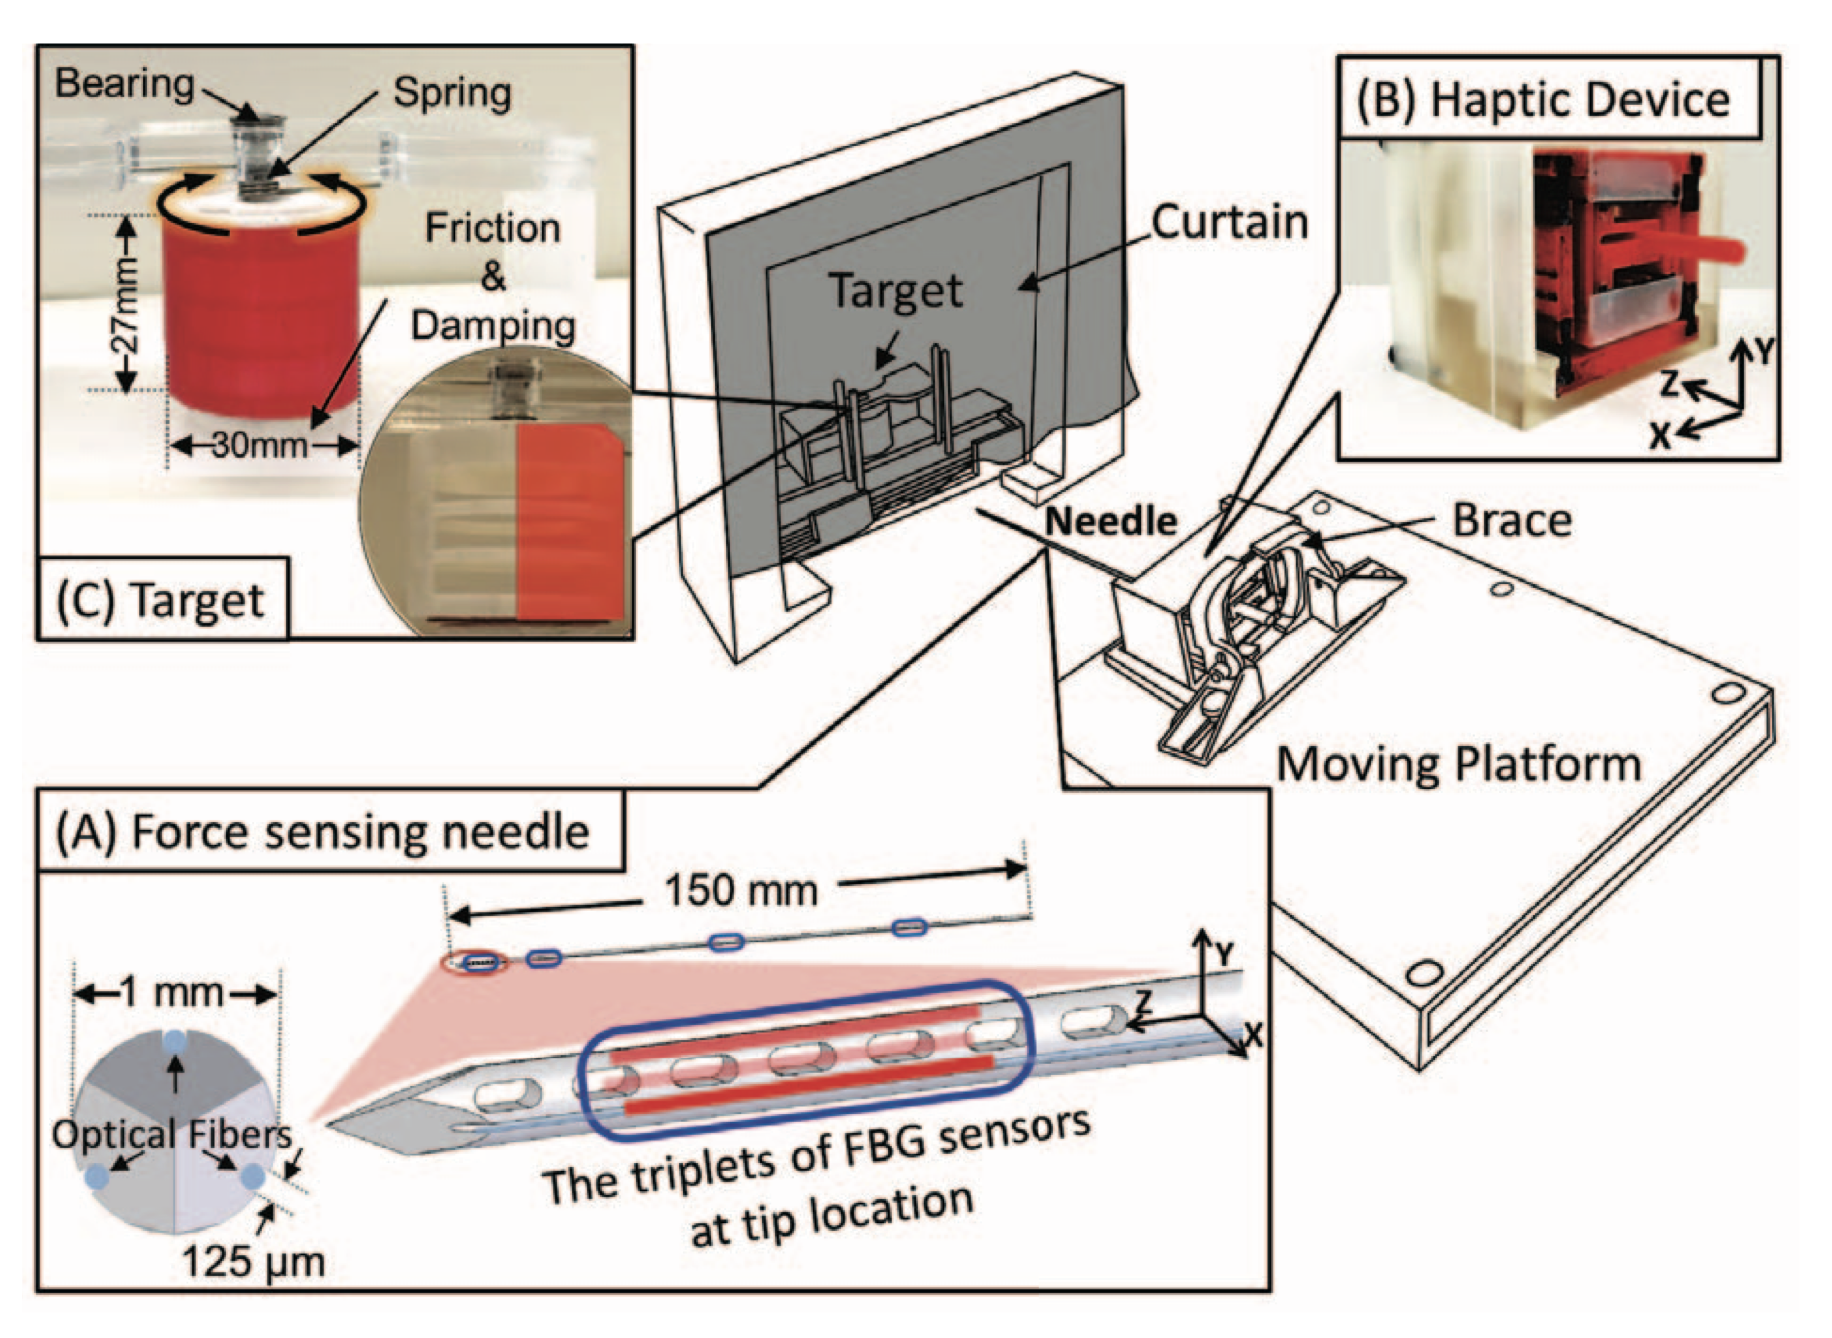 Four figures: bottom left showing a medical needle with strain sensors embedded, top left shows the experiment target, top right a haptic device that displays needle forces to the user and middle shows the entire experiment setup.